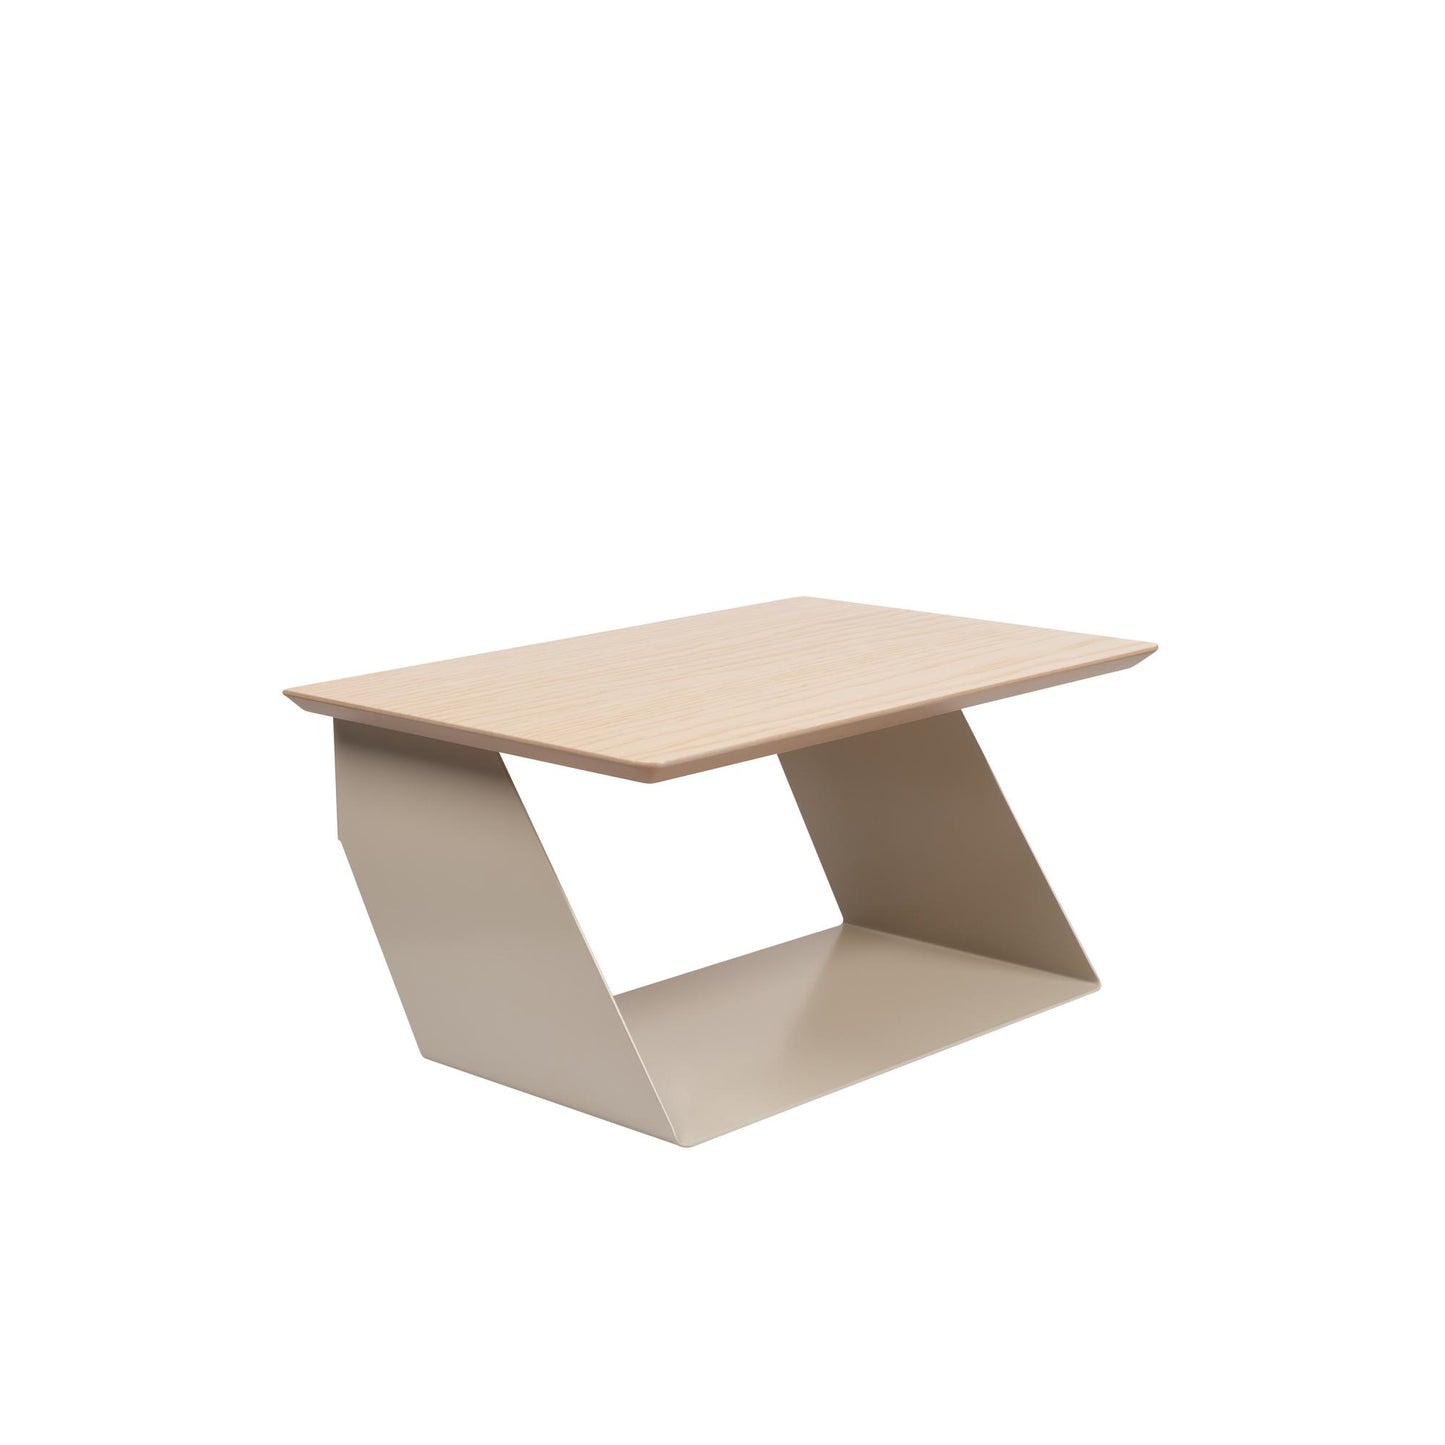 Edgy Wood Shelf by Maze #Off-white with Top in Ash